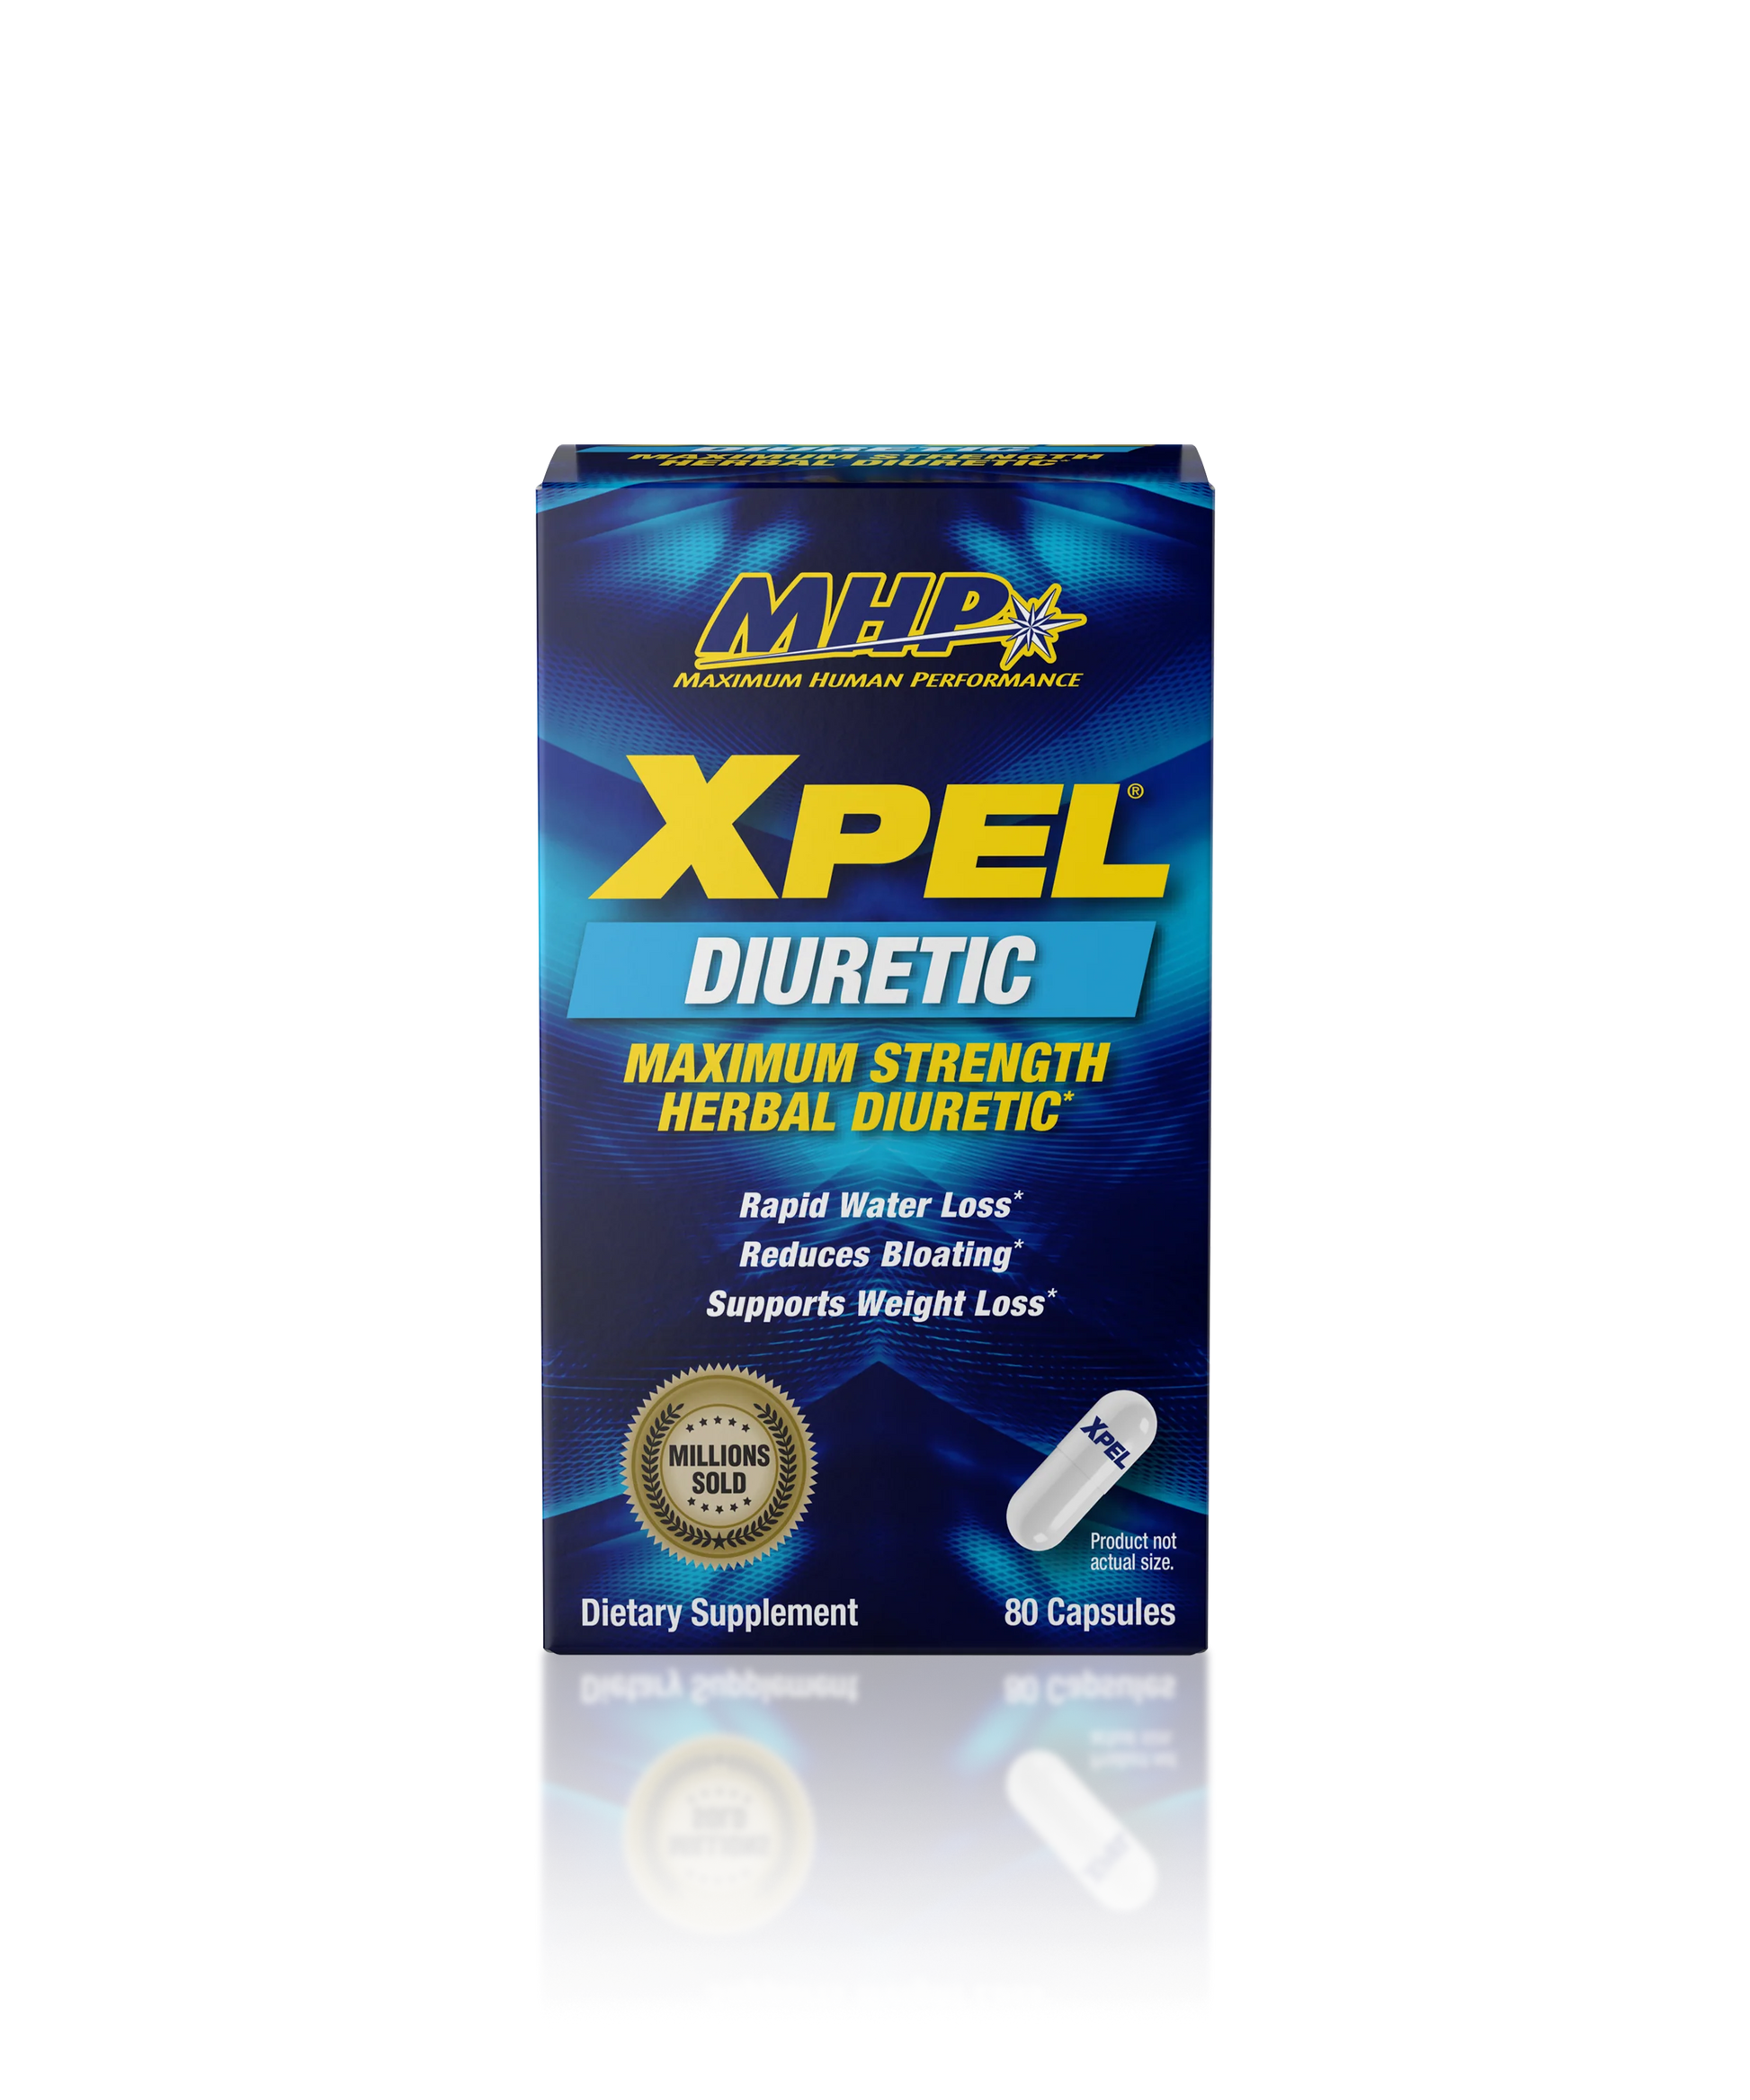 Xpel for rapid water loss